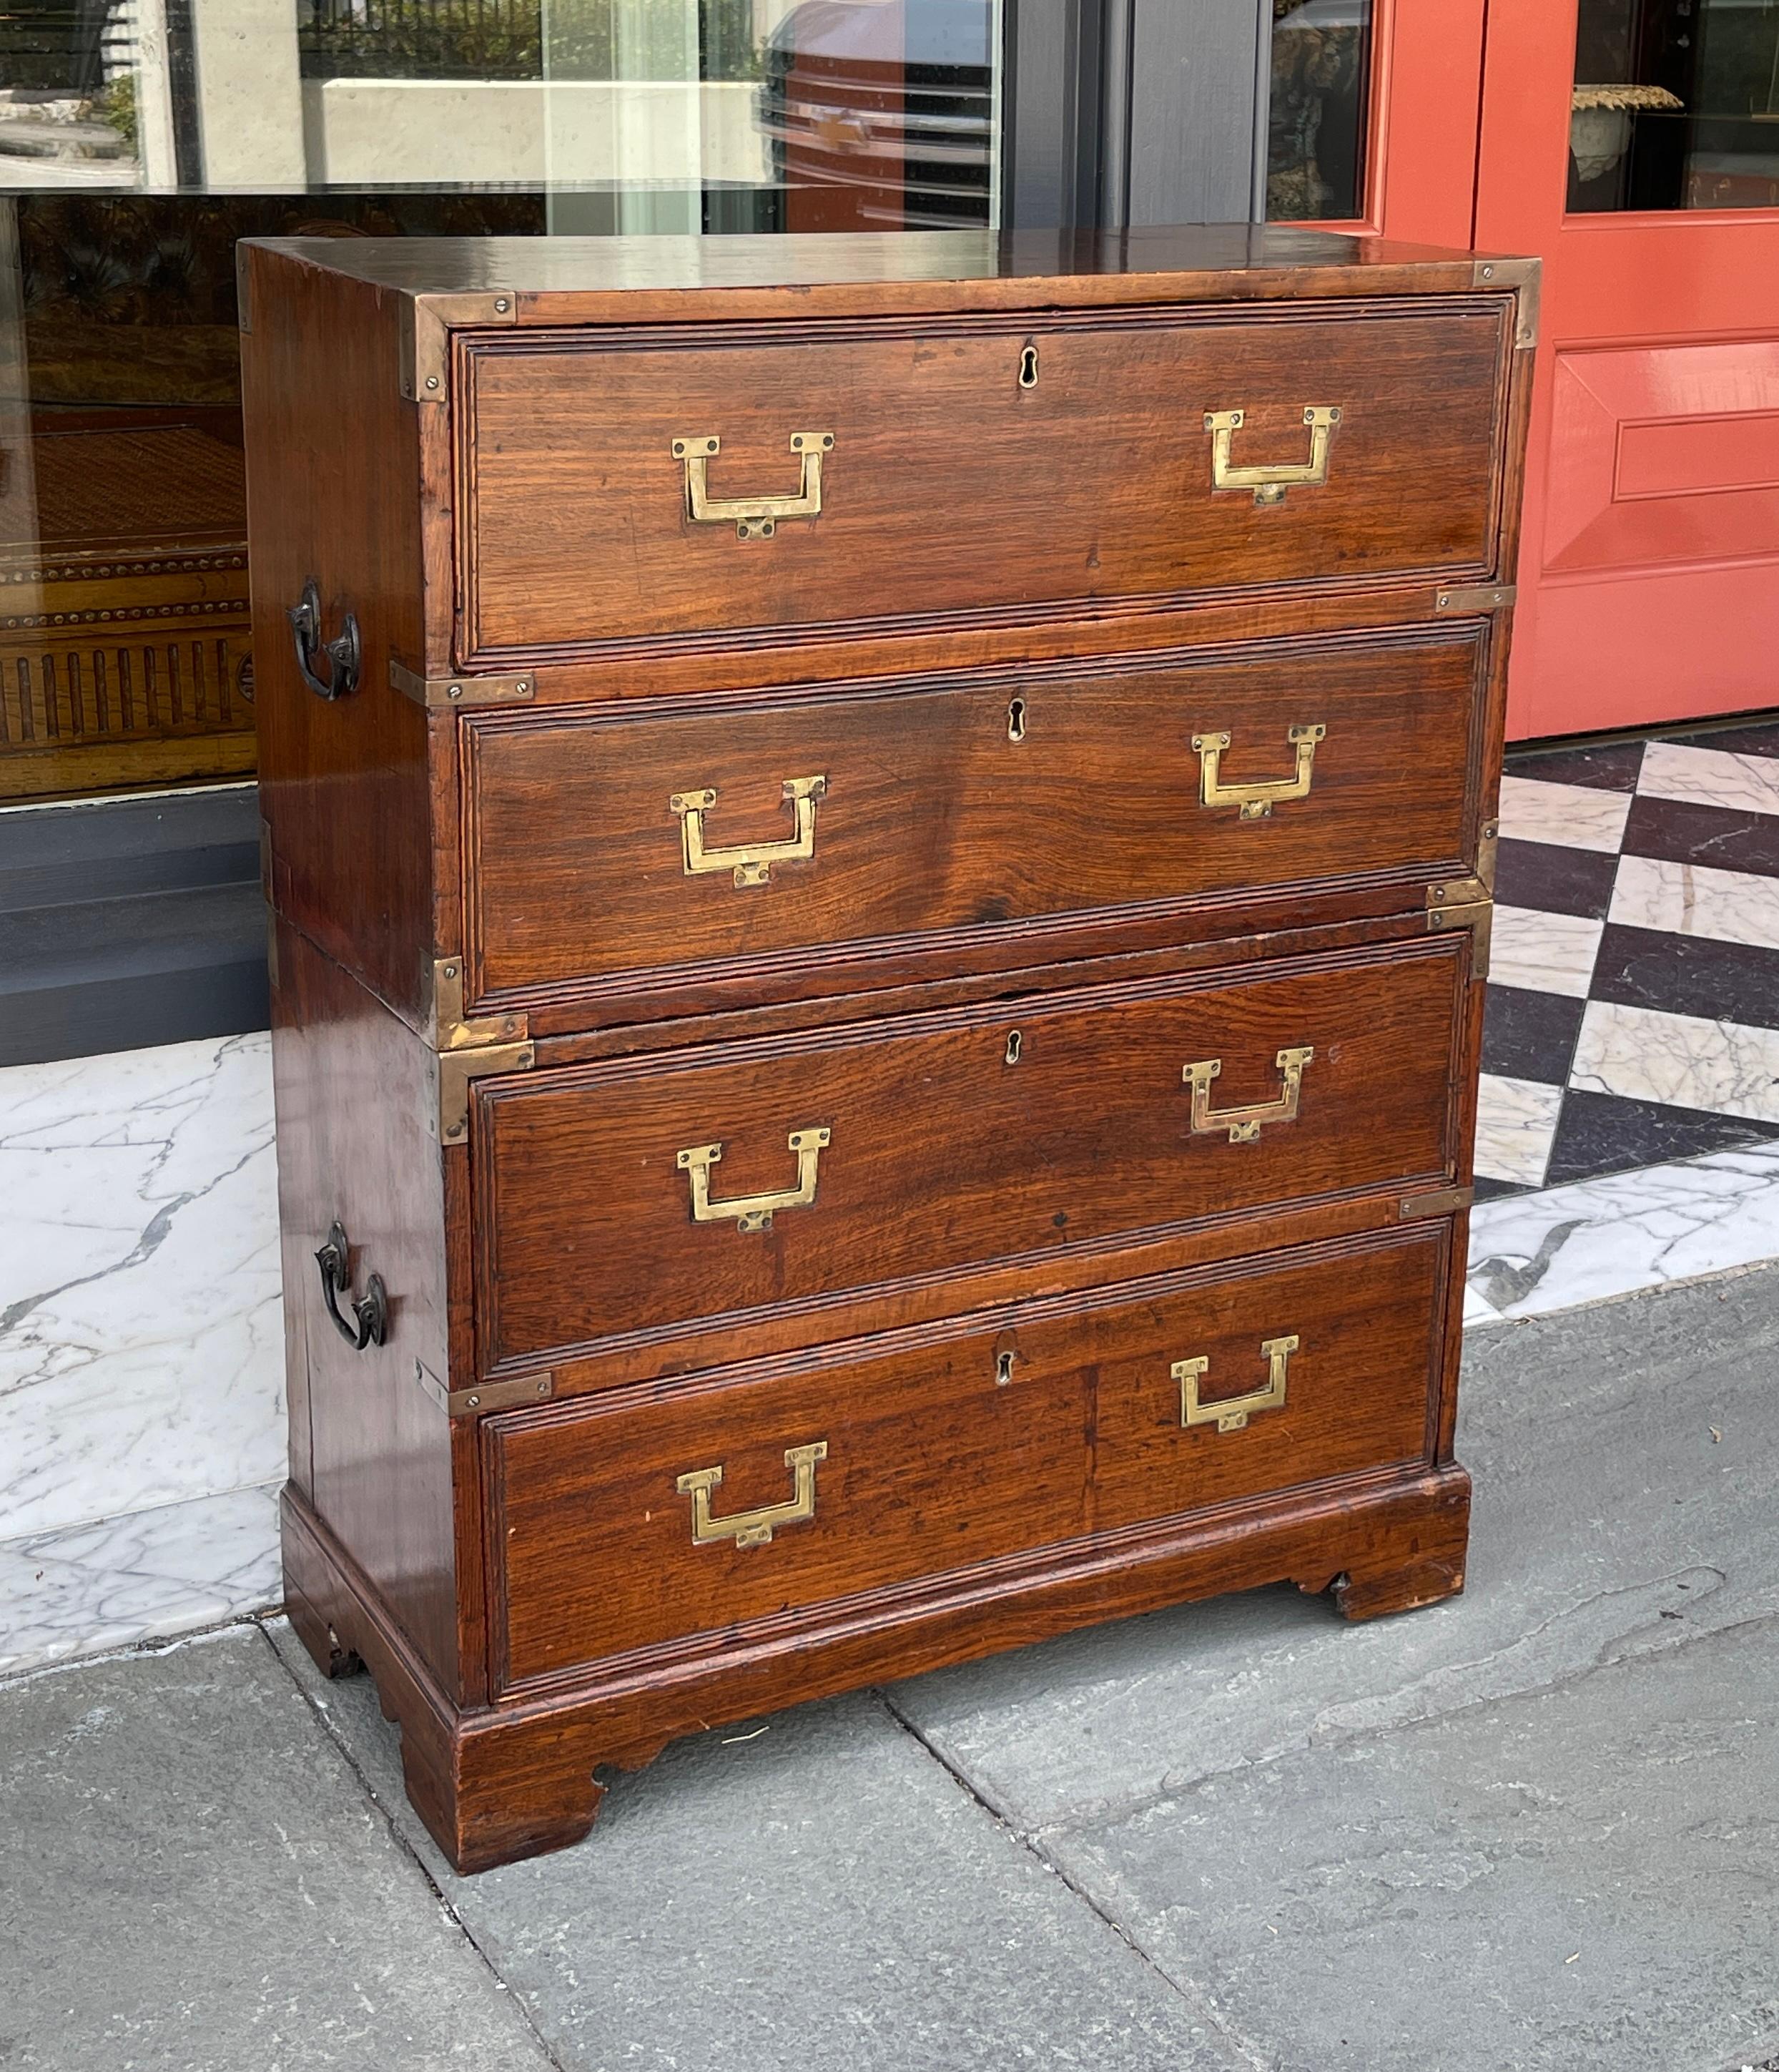 Diminutive campaign chest late 19th century. 2 part